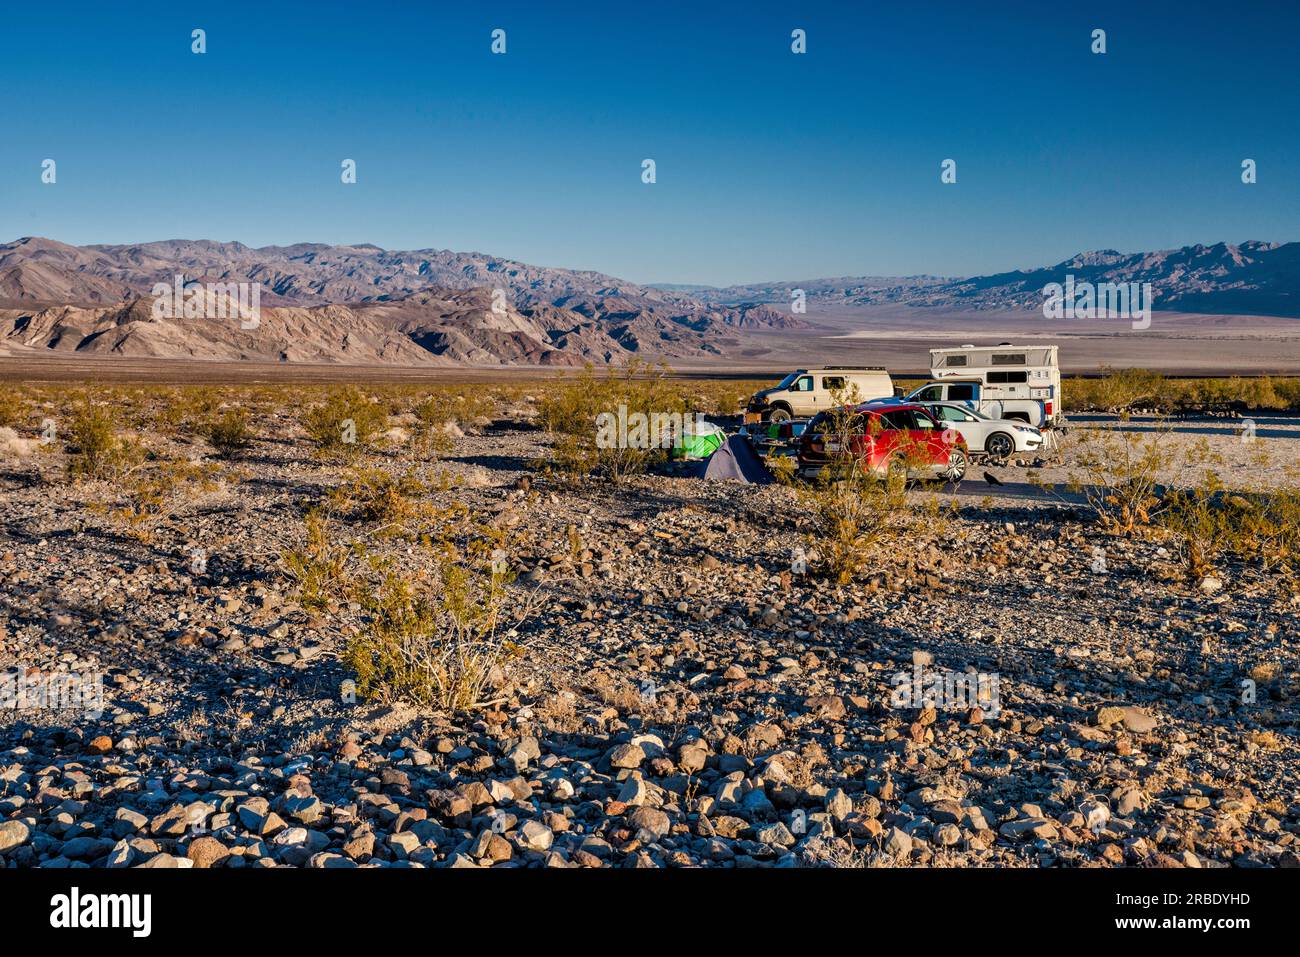 Emigrant Campground, Cottonwood Mountains on left, Amargosa Range on right in distance, sunrise, Death Valley National Park, California, USA Stock Photo